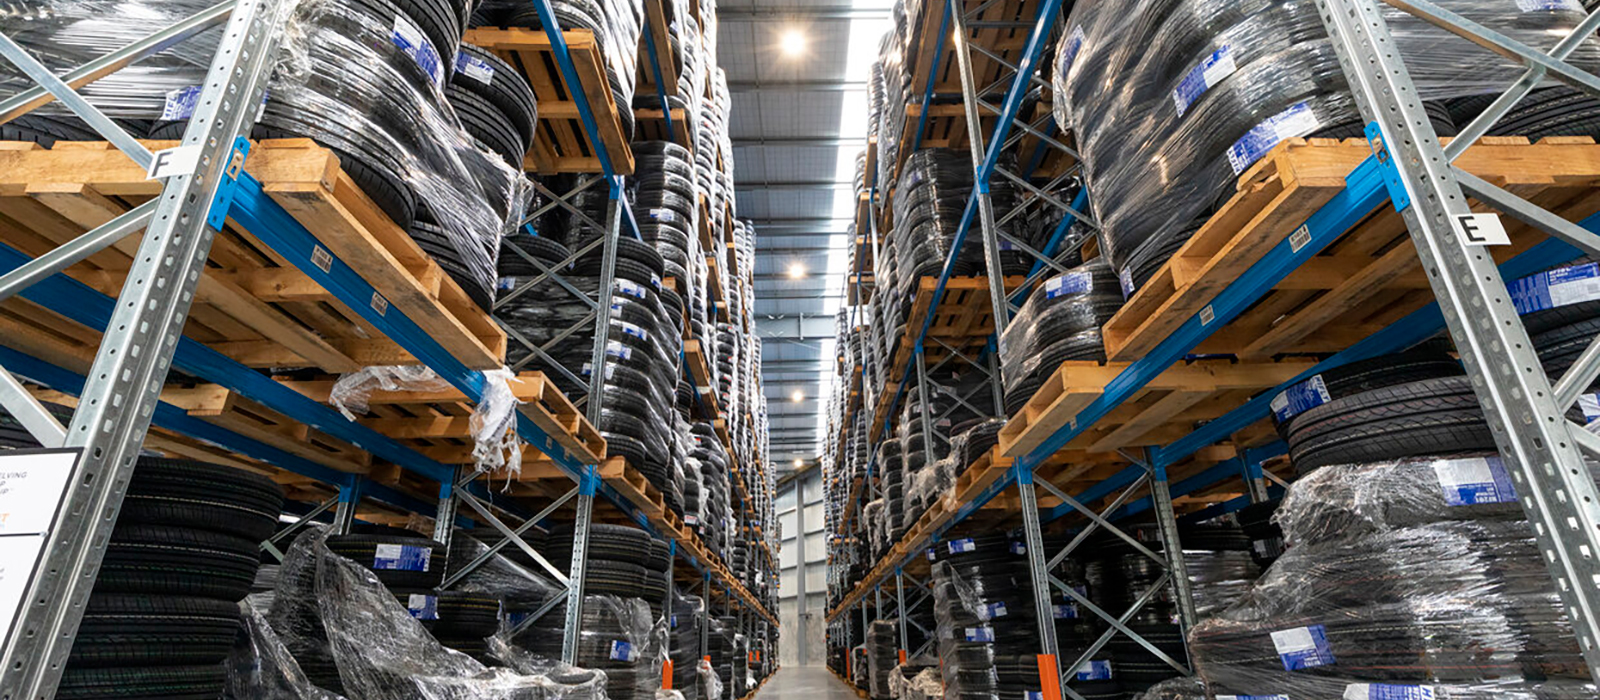 Tyremax Christchurch Warehouse Fitout, Pallet Racking, 12m High Pallet Racking, Tyre Storage